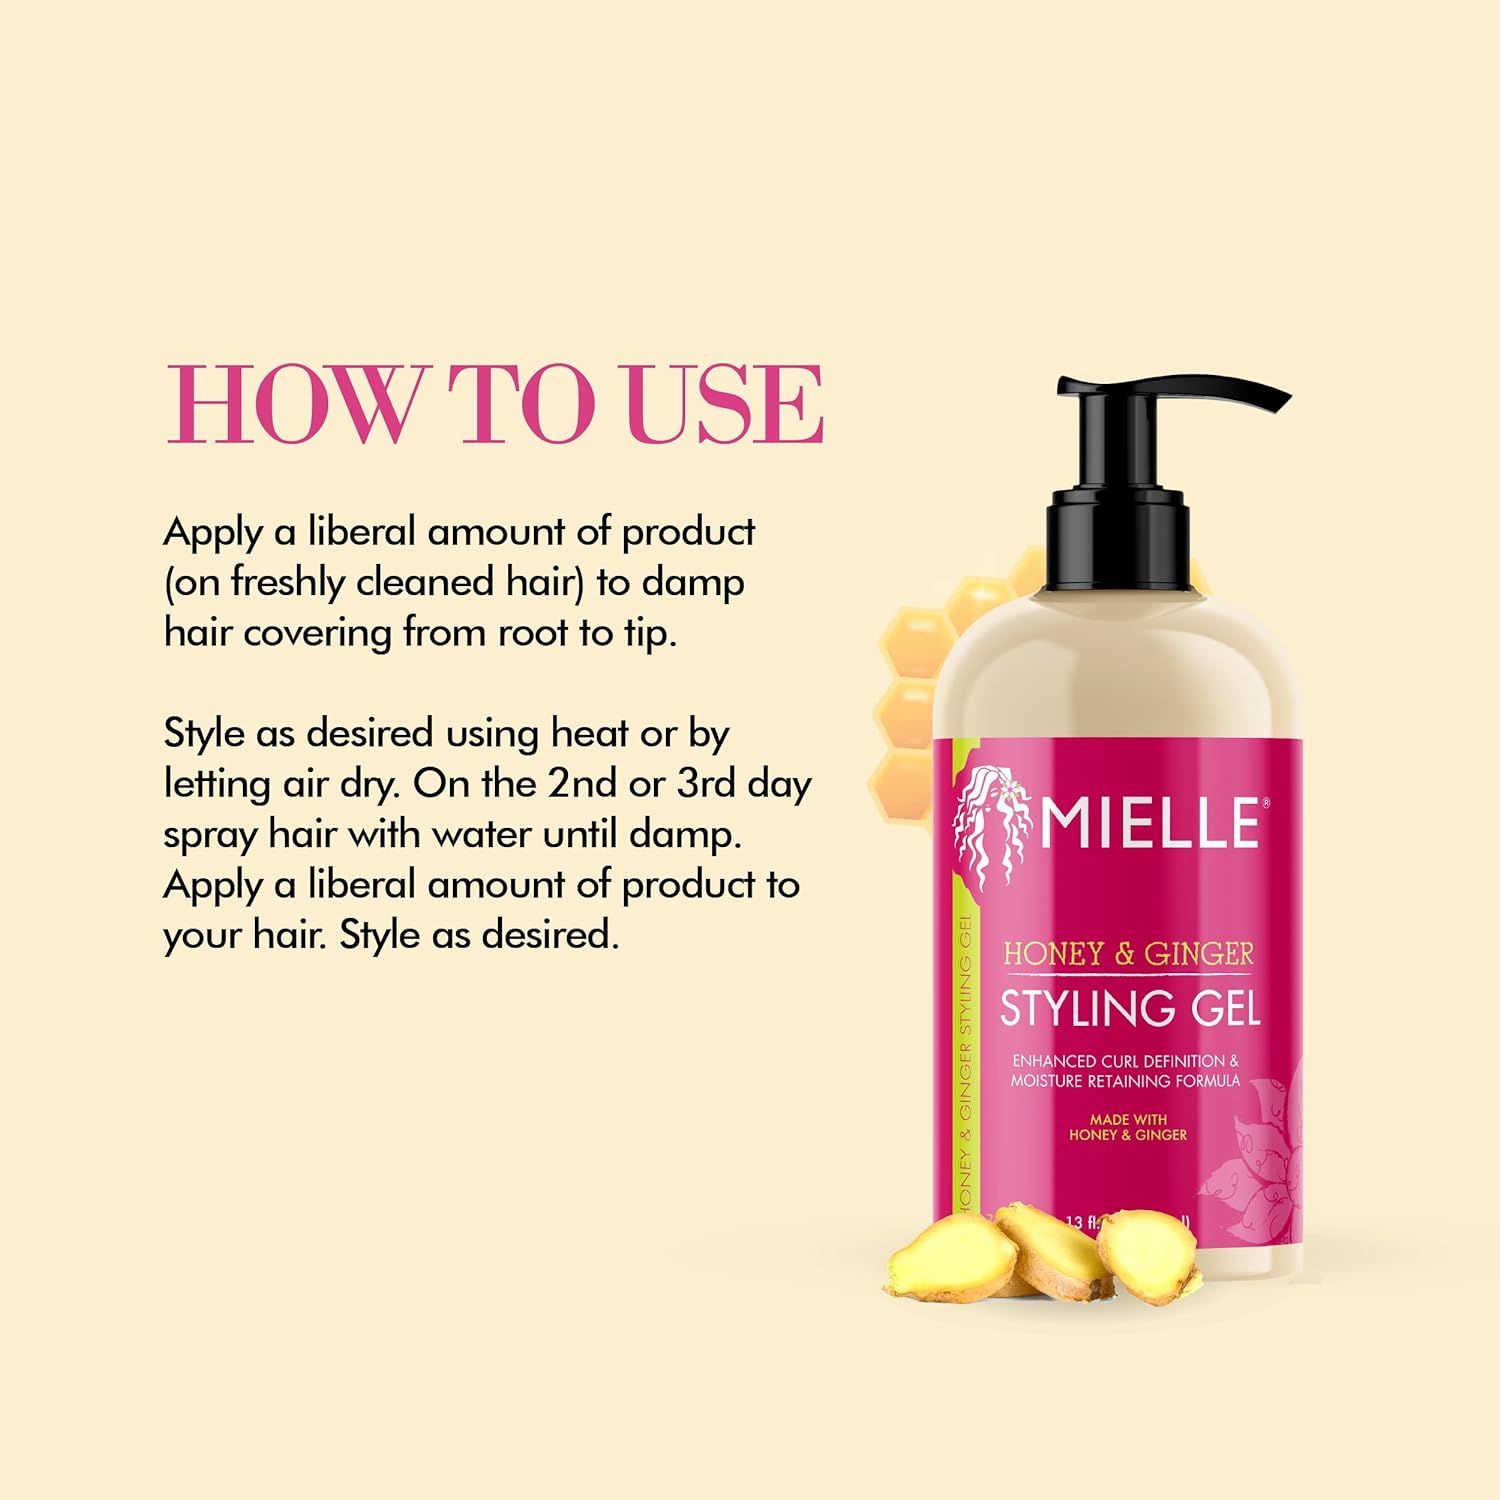 Mielle Organics Honey and Ginger Styling Gel